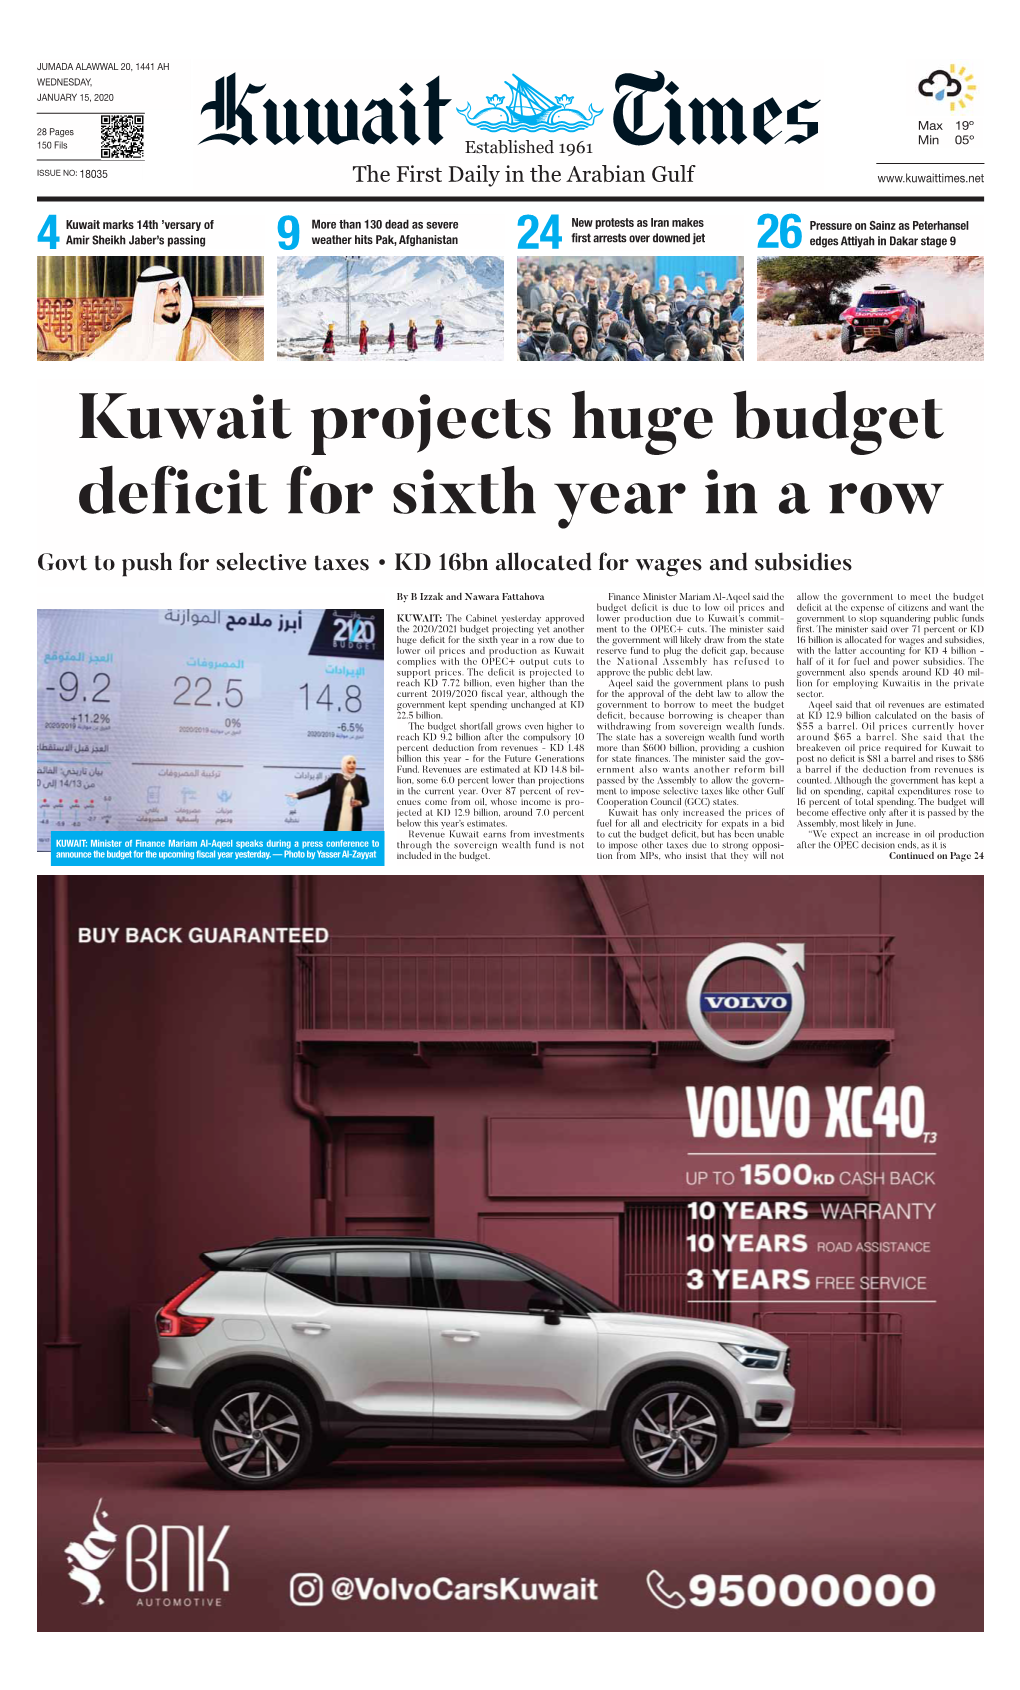 Kuwait Projects Huge Budget Deficit for Sixth Year in a Row